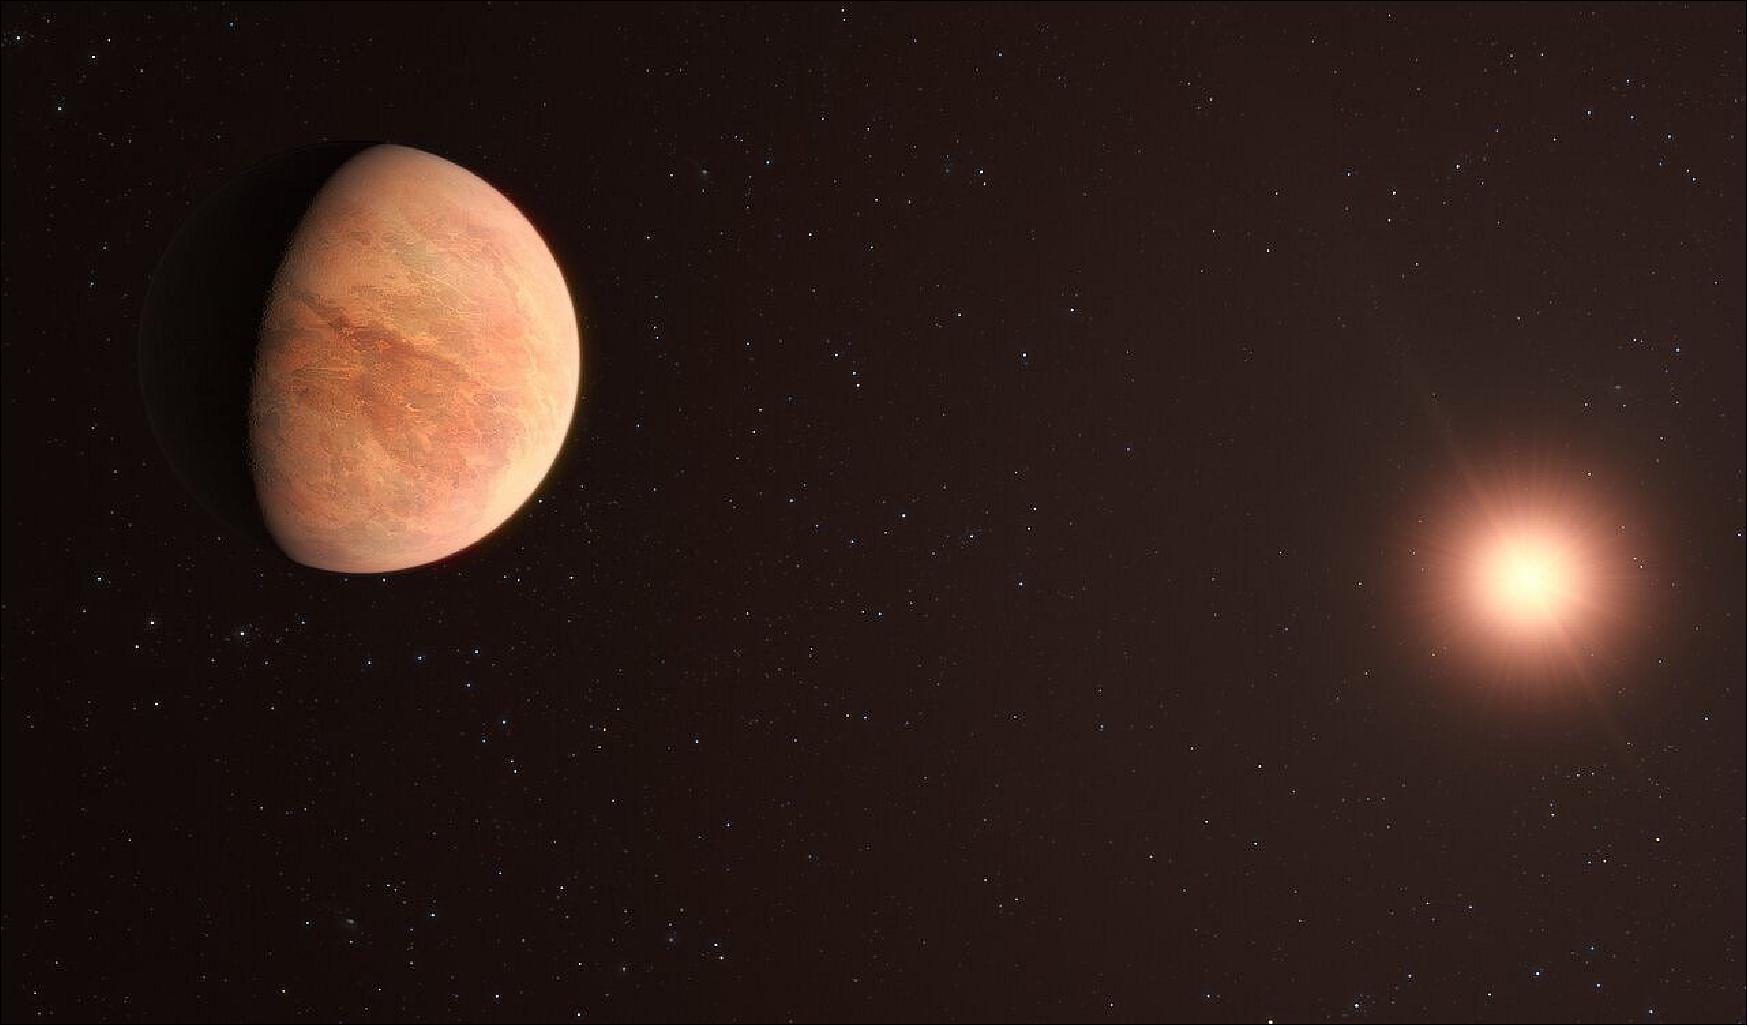 Figure 17: This artist’s impression shows L 98-59b, one of the planets in the L 98-59 system 35 light-years away. The system contains four confirmed rocky planets with a potential fifth, the furthest from the star, being unconfirmed. In 2021, astronomers used data from the Echelle SPectrograph for Rocky Exoplanets and Stable Spectroscopic Observations (ESPRESSO) instrument on ESO’s VLT to measure the mass of L 98-59b, finding it to be half that of Venus. This makes it the lightest planet measured to date using the radial velocity technique (image credit: ESO, M. Kornmesser)